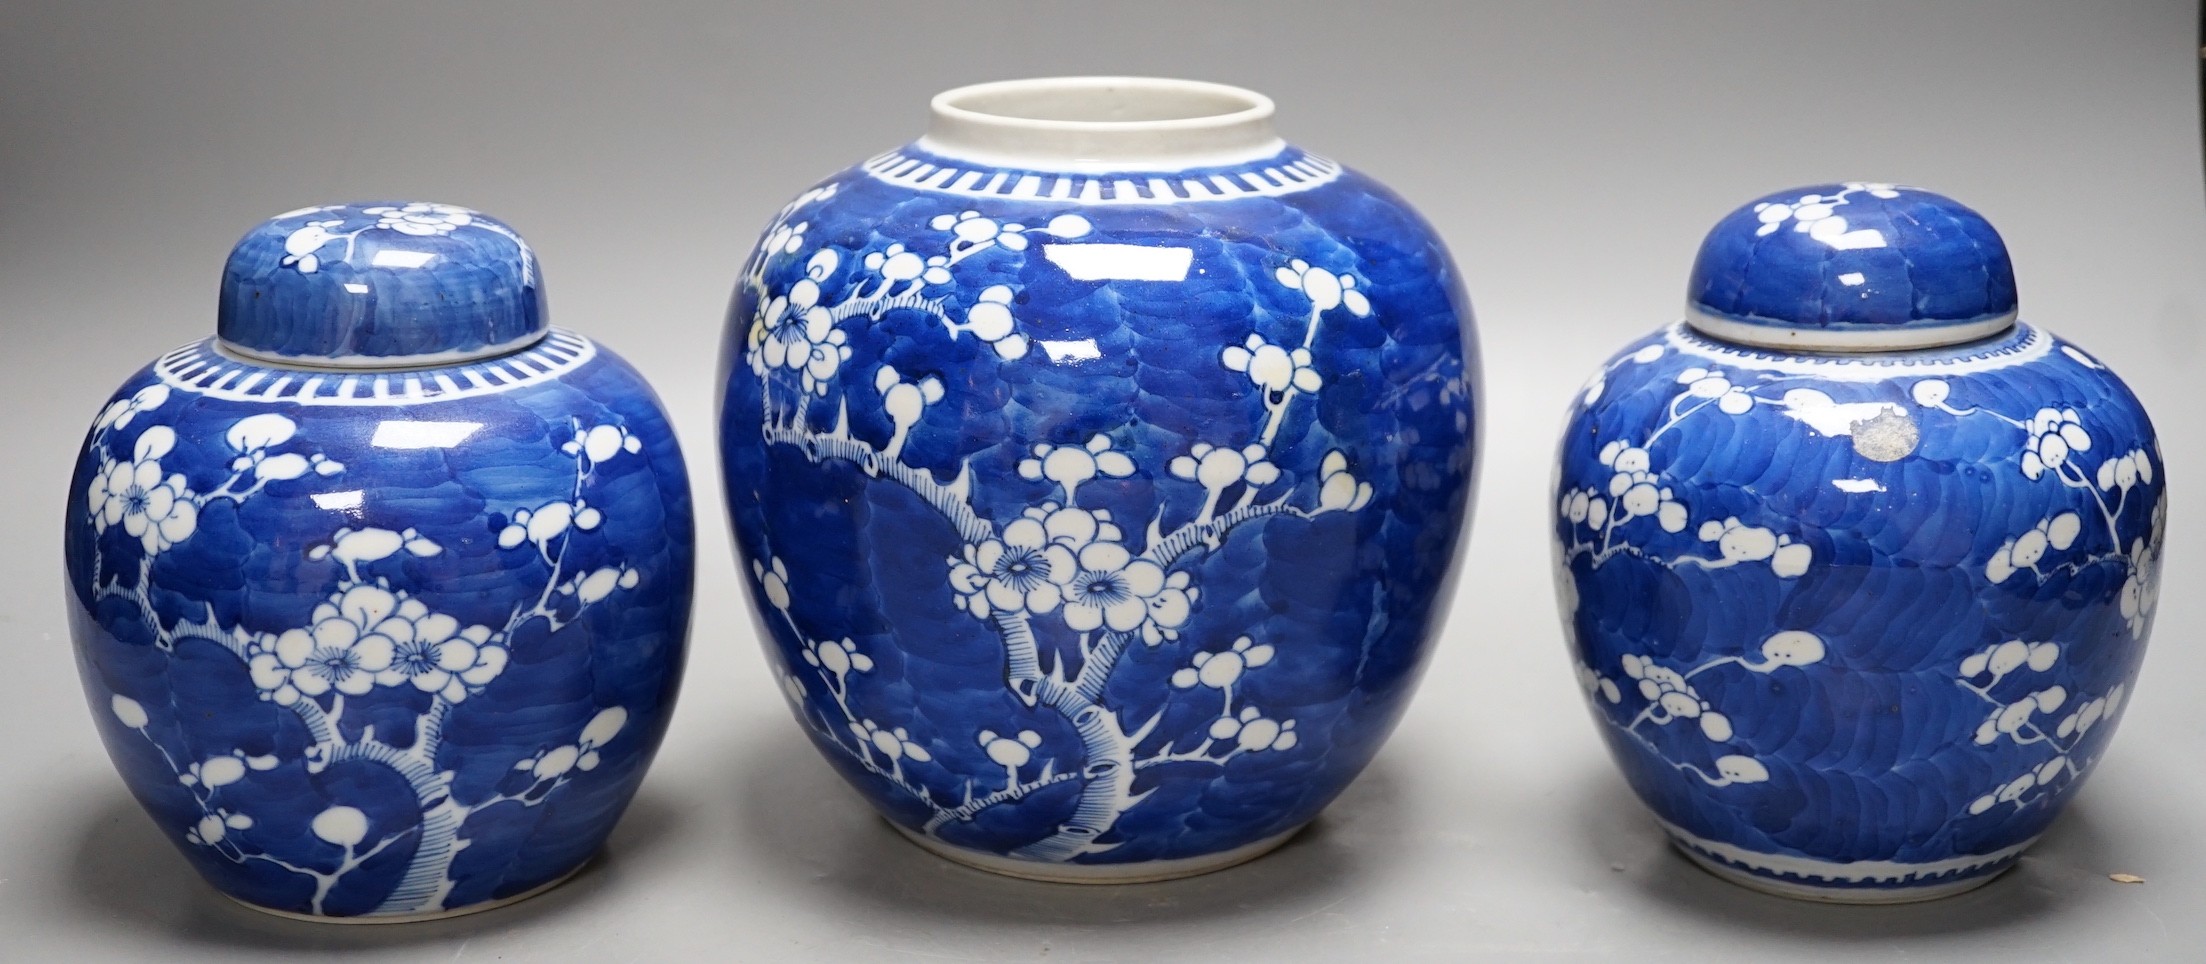 Three late 19th/early 20th century Chinese blue and white prunus jars, two covers. Tallest 16cm